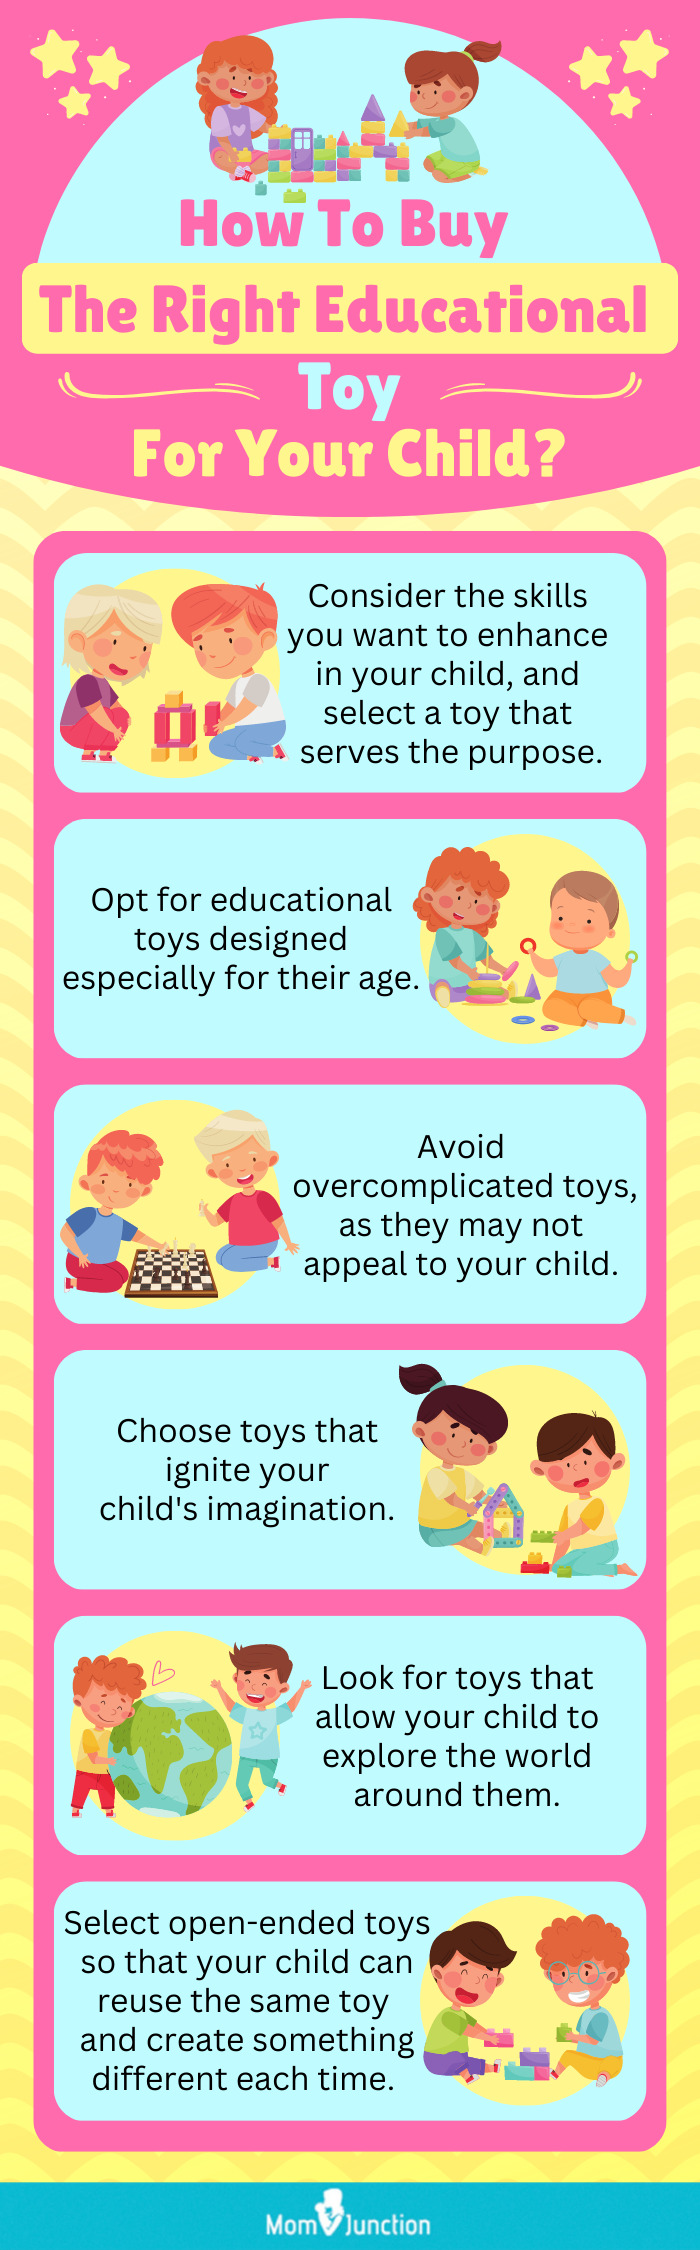 How To Buy The Right Educational Toy For Your Child?